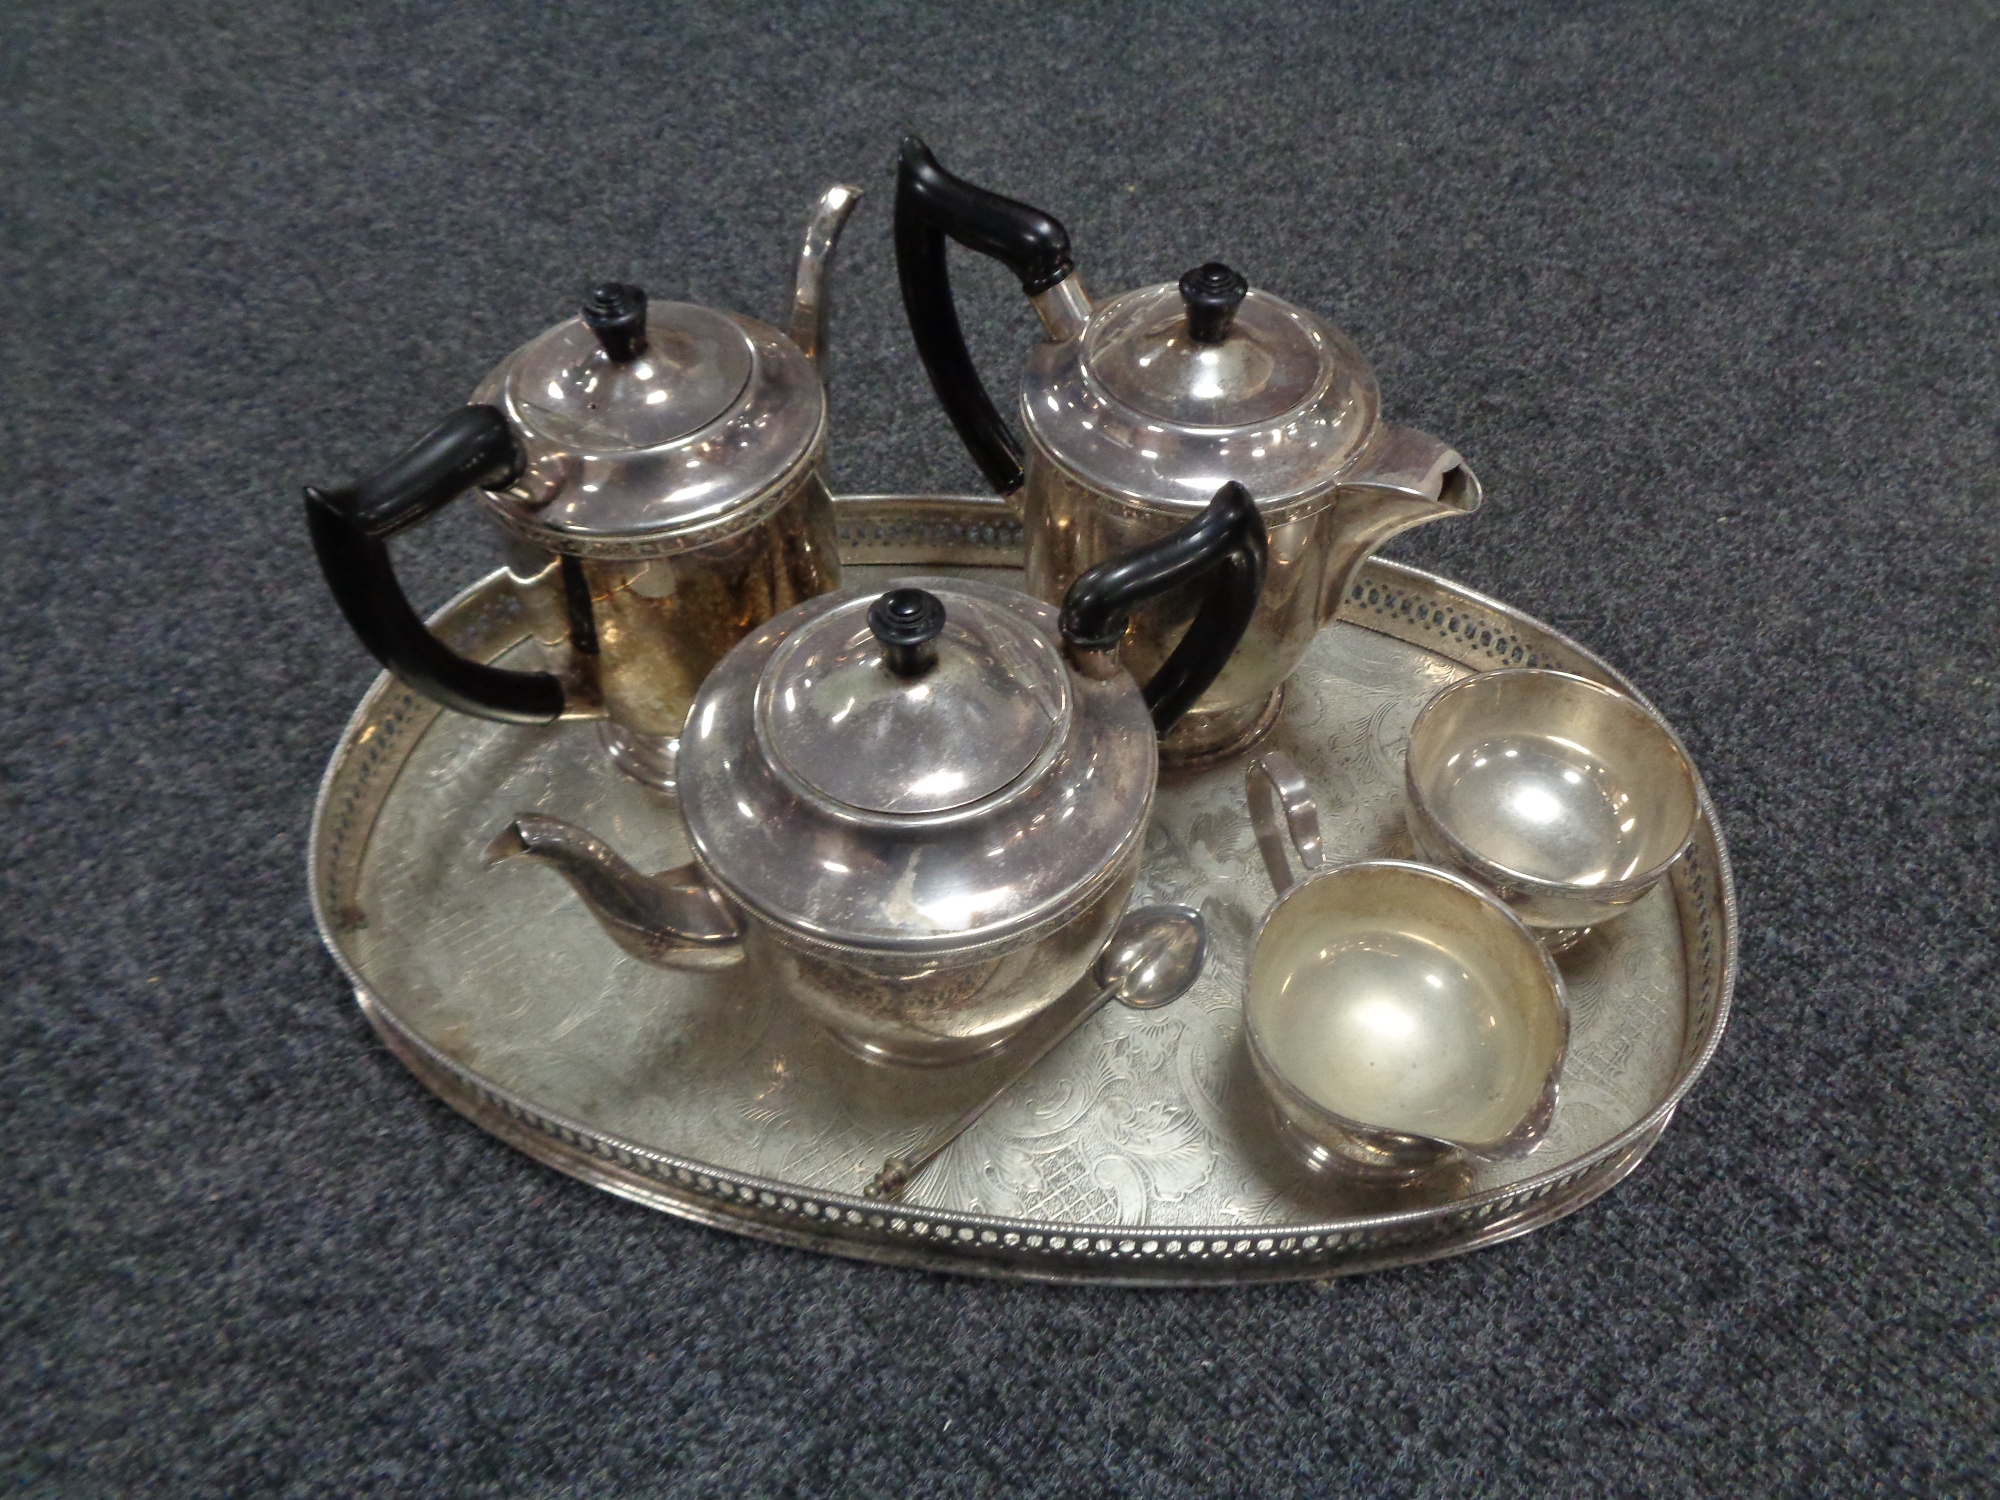 A silver plated serving tray containing five piece Viner's plated tea service